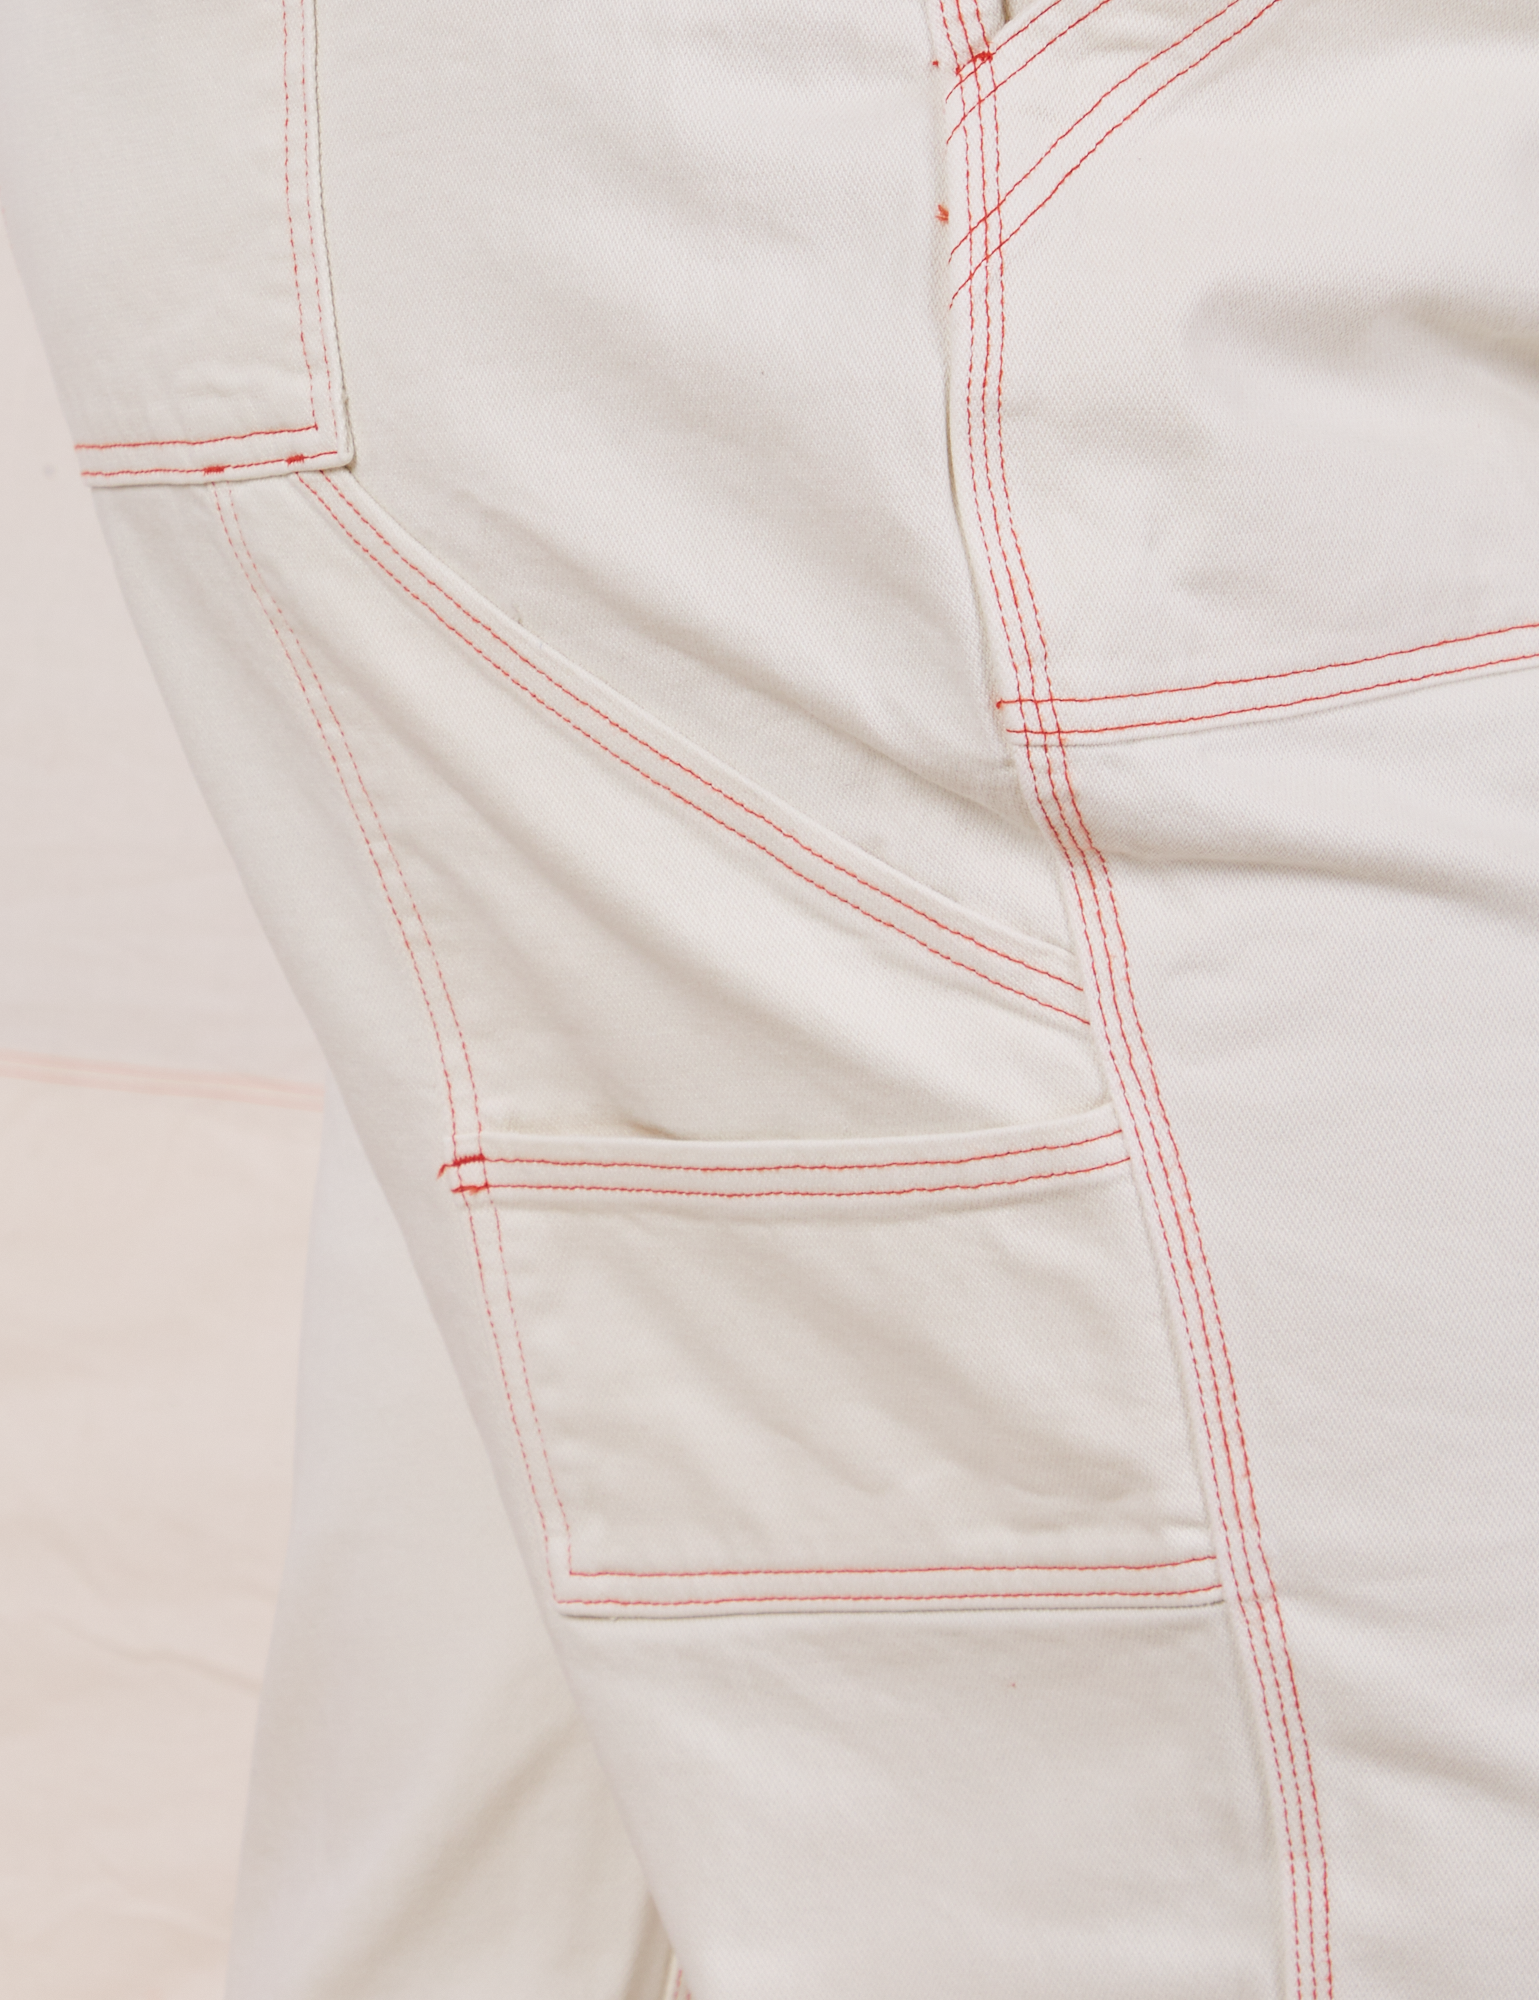 Carpenter Jeans in Vintage Tee Off-White pant leg close up. Orange contrast top stitching. 